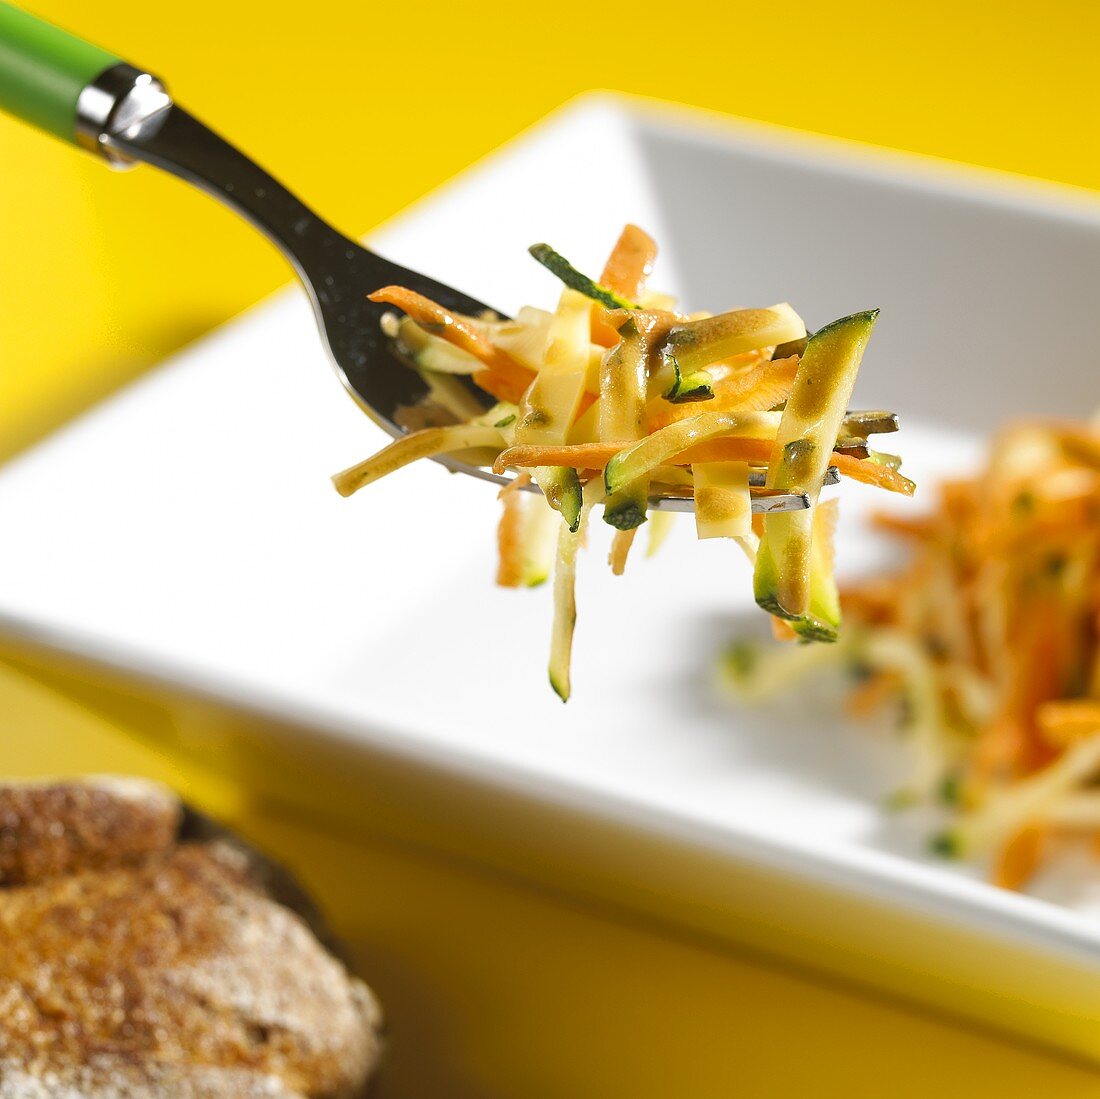 Courgette and carrot salad on fork